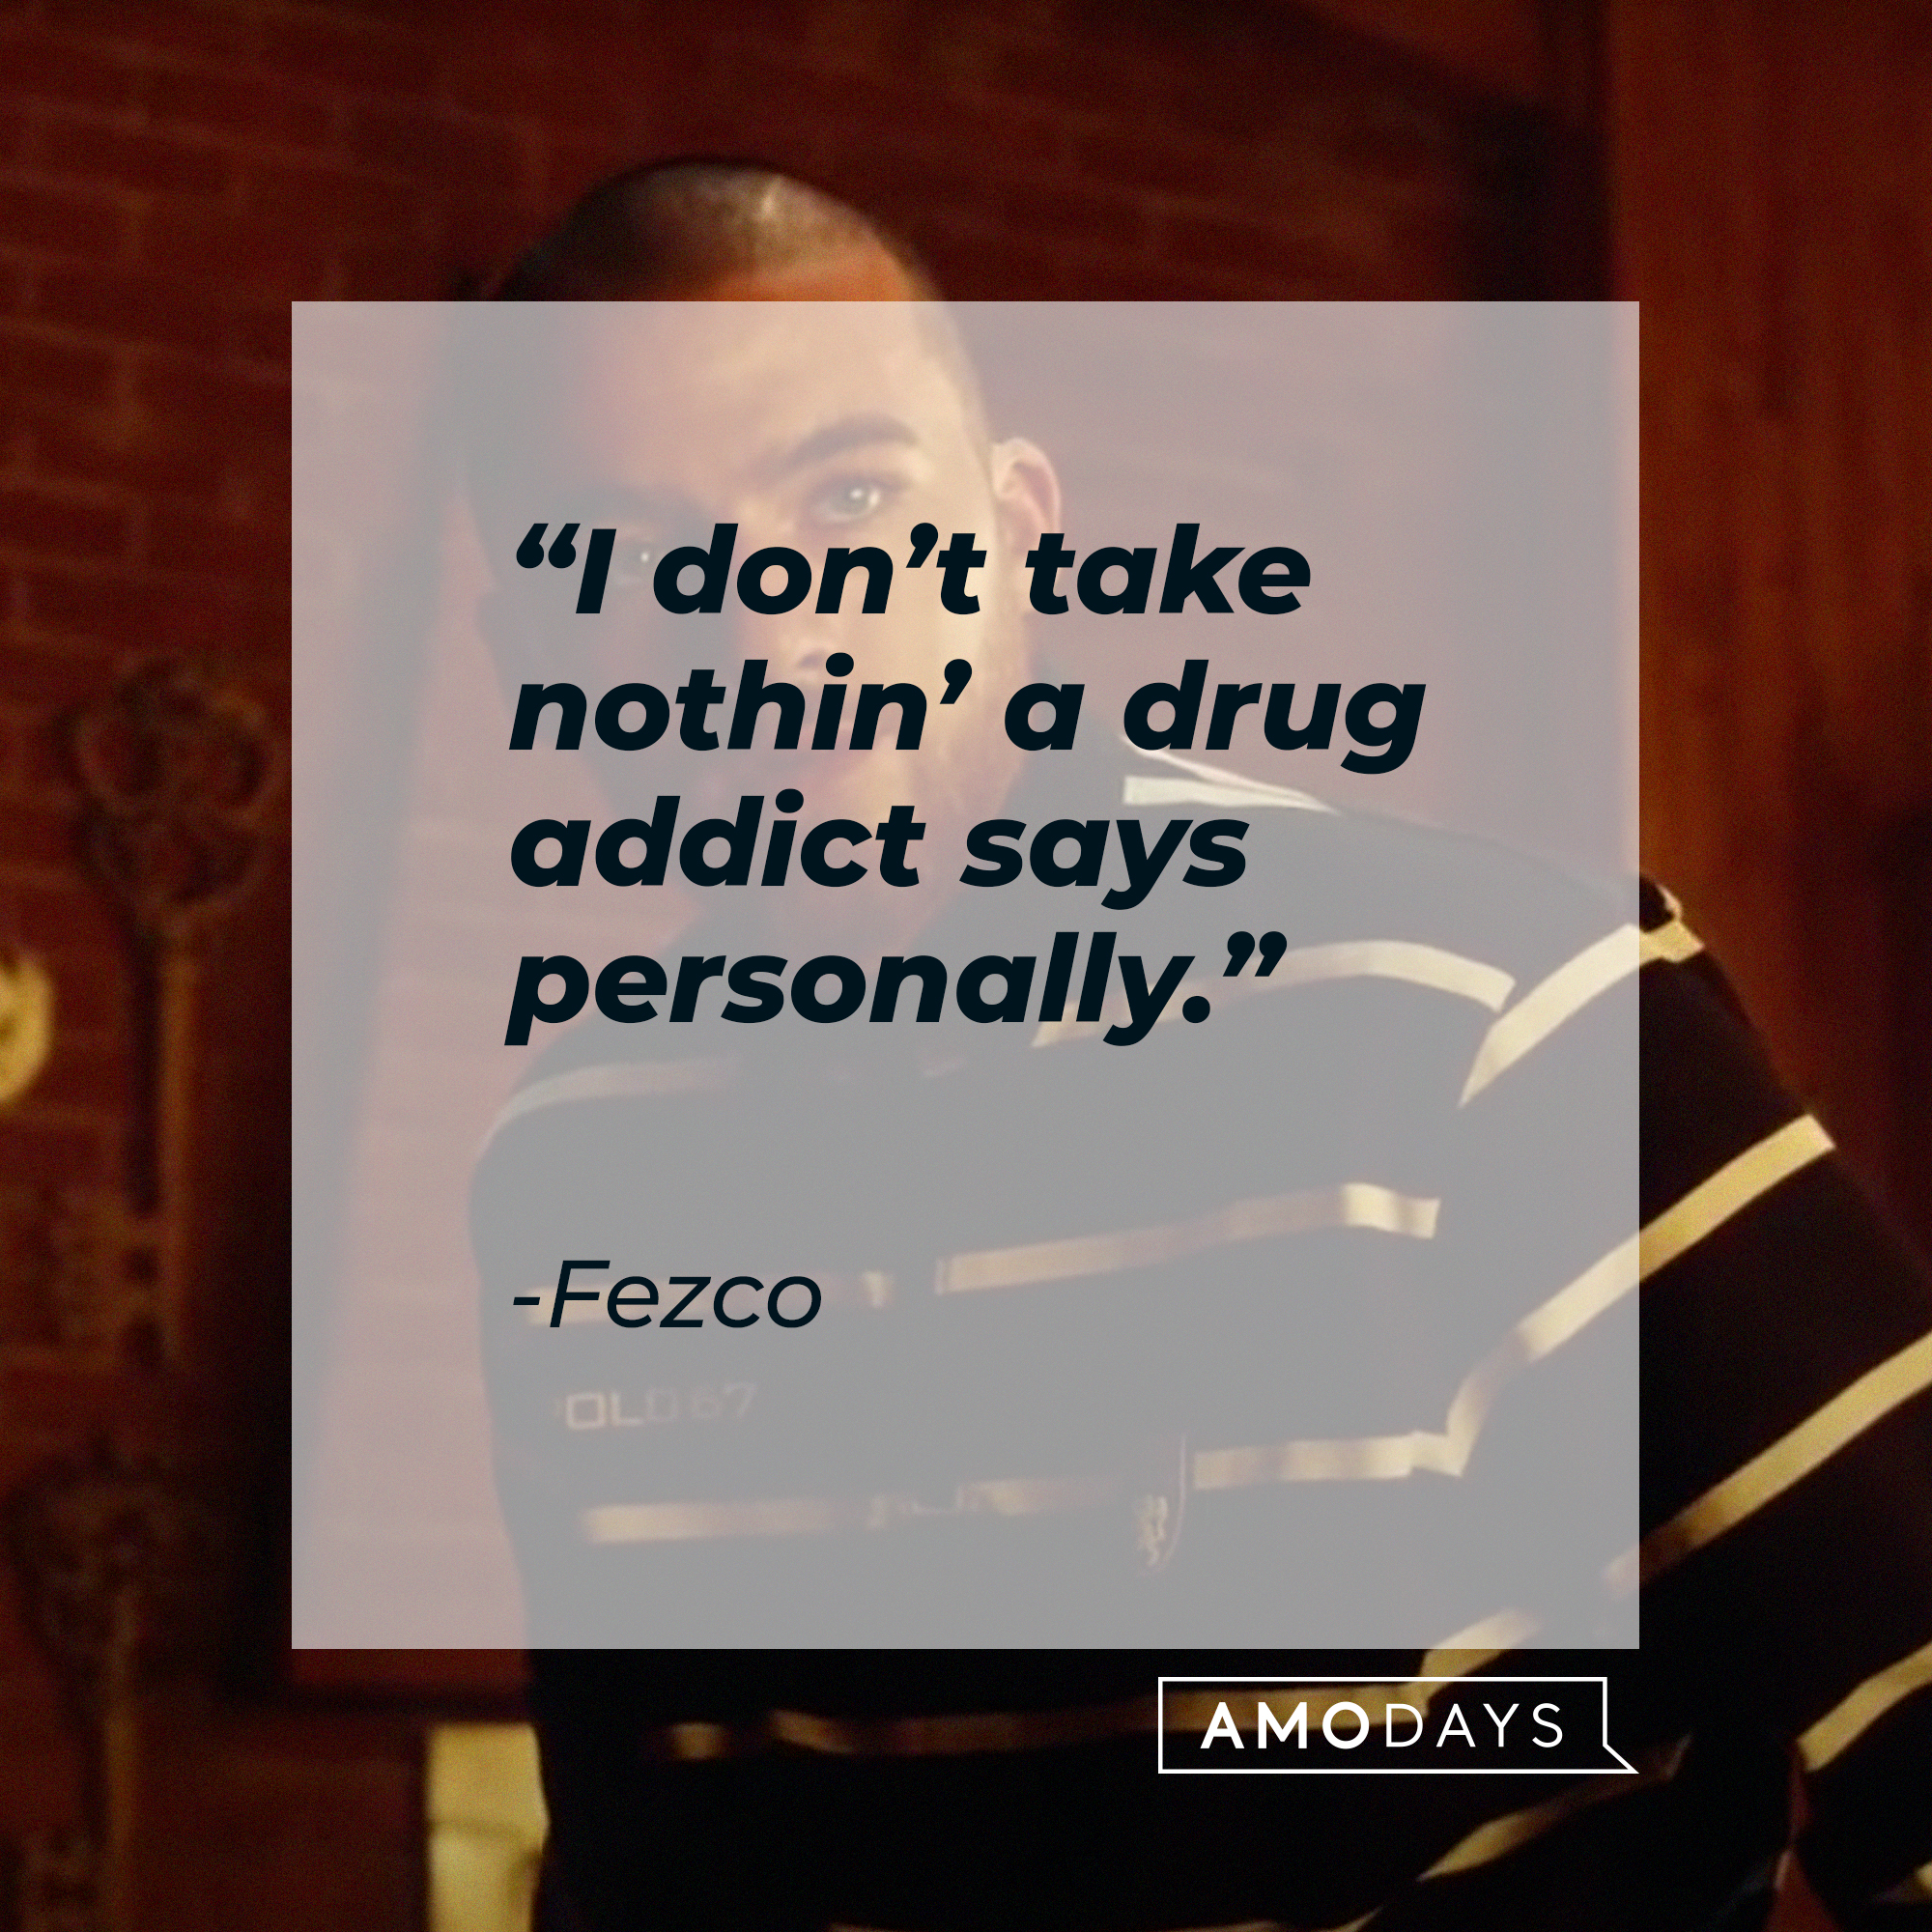 Fezco, with his quote: “I don’t take nothin’ a drug addict says personally.” | Source: youtube.com/EuphoriaHBO